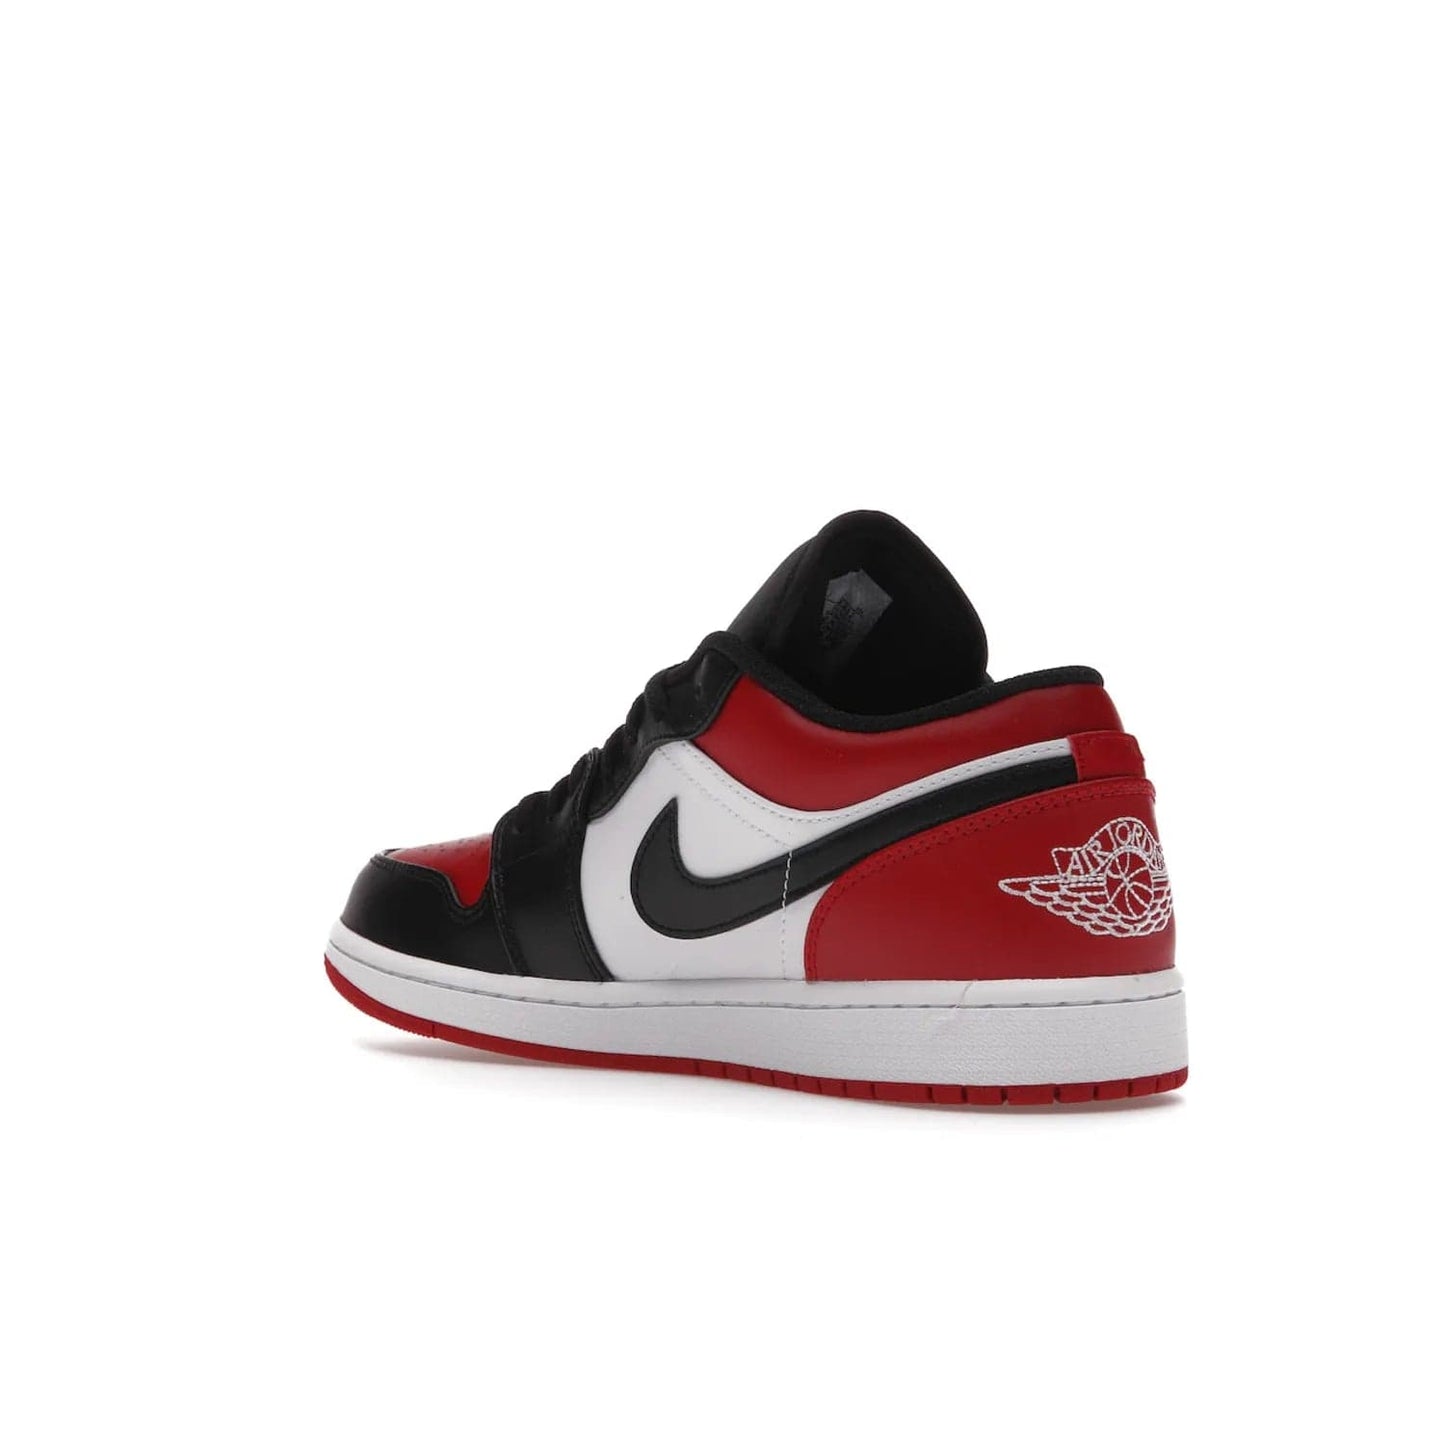 Jordan 1 Low Bred Toe - Image 24 - Only at www.BallersClubKickz.com - Step into the iconic Jordan 1 Retro. Mixing and matching of leather in red, black, and white makes for a unique colorway. Finished off with a Wing logo embroidery & Jumpman label. Comfortable and stylish at an affordable $100, the Jordan 1 Low Bred Toe is perfect for any true sneaker fan.